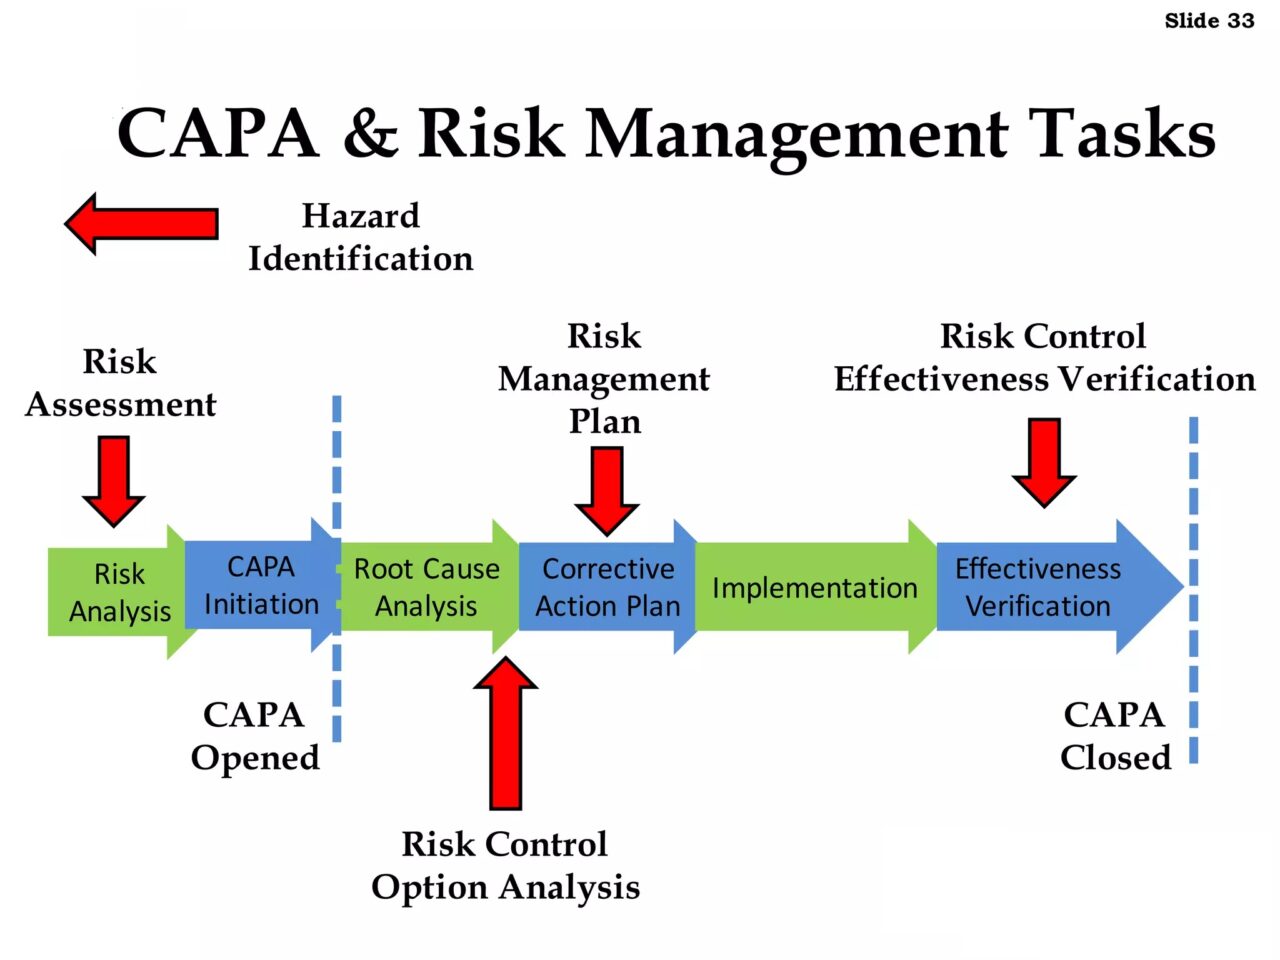 Integrating Risk Management into the CAPA Process